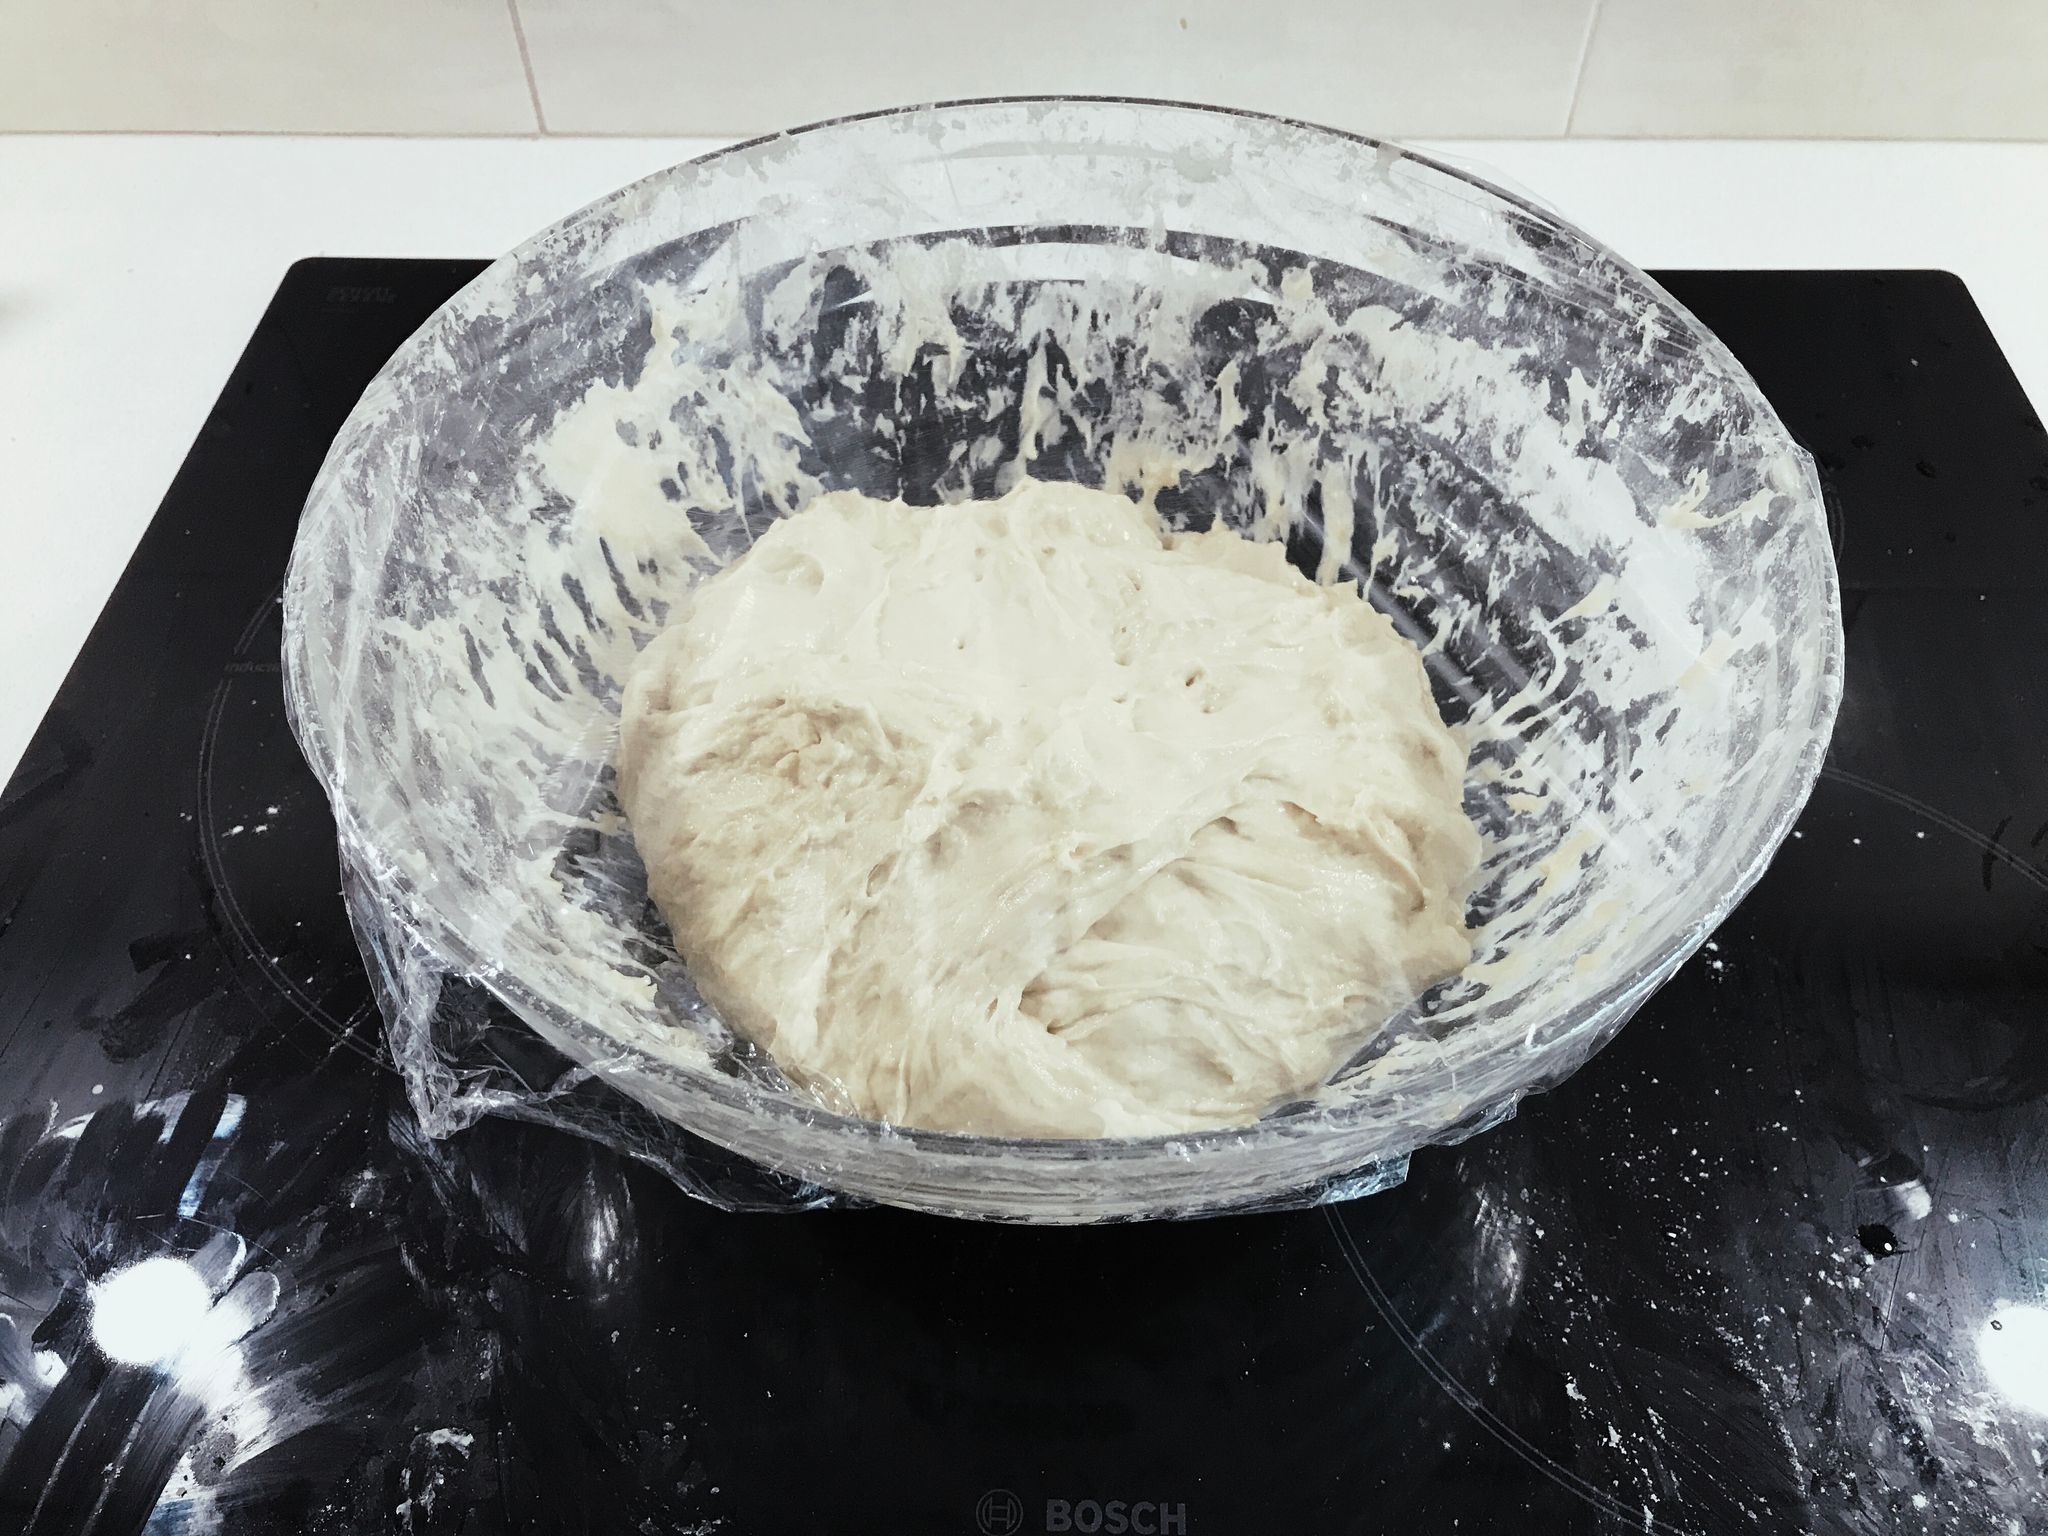 A glass bowl with a full bread mix of flour, water, salt, and yeast.